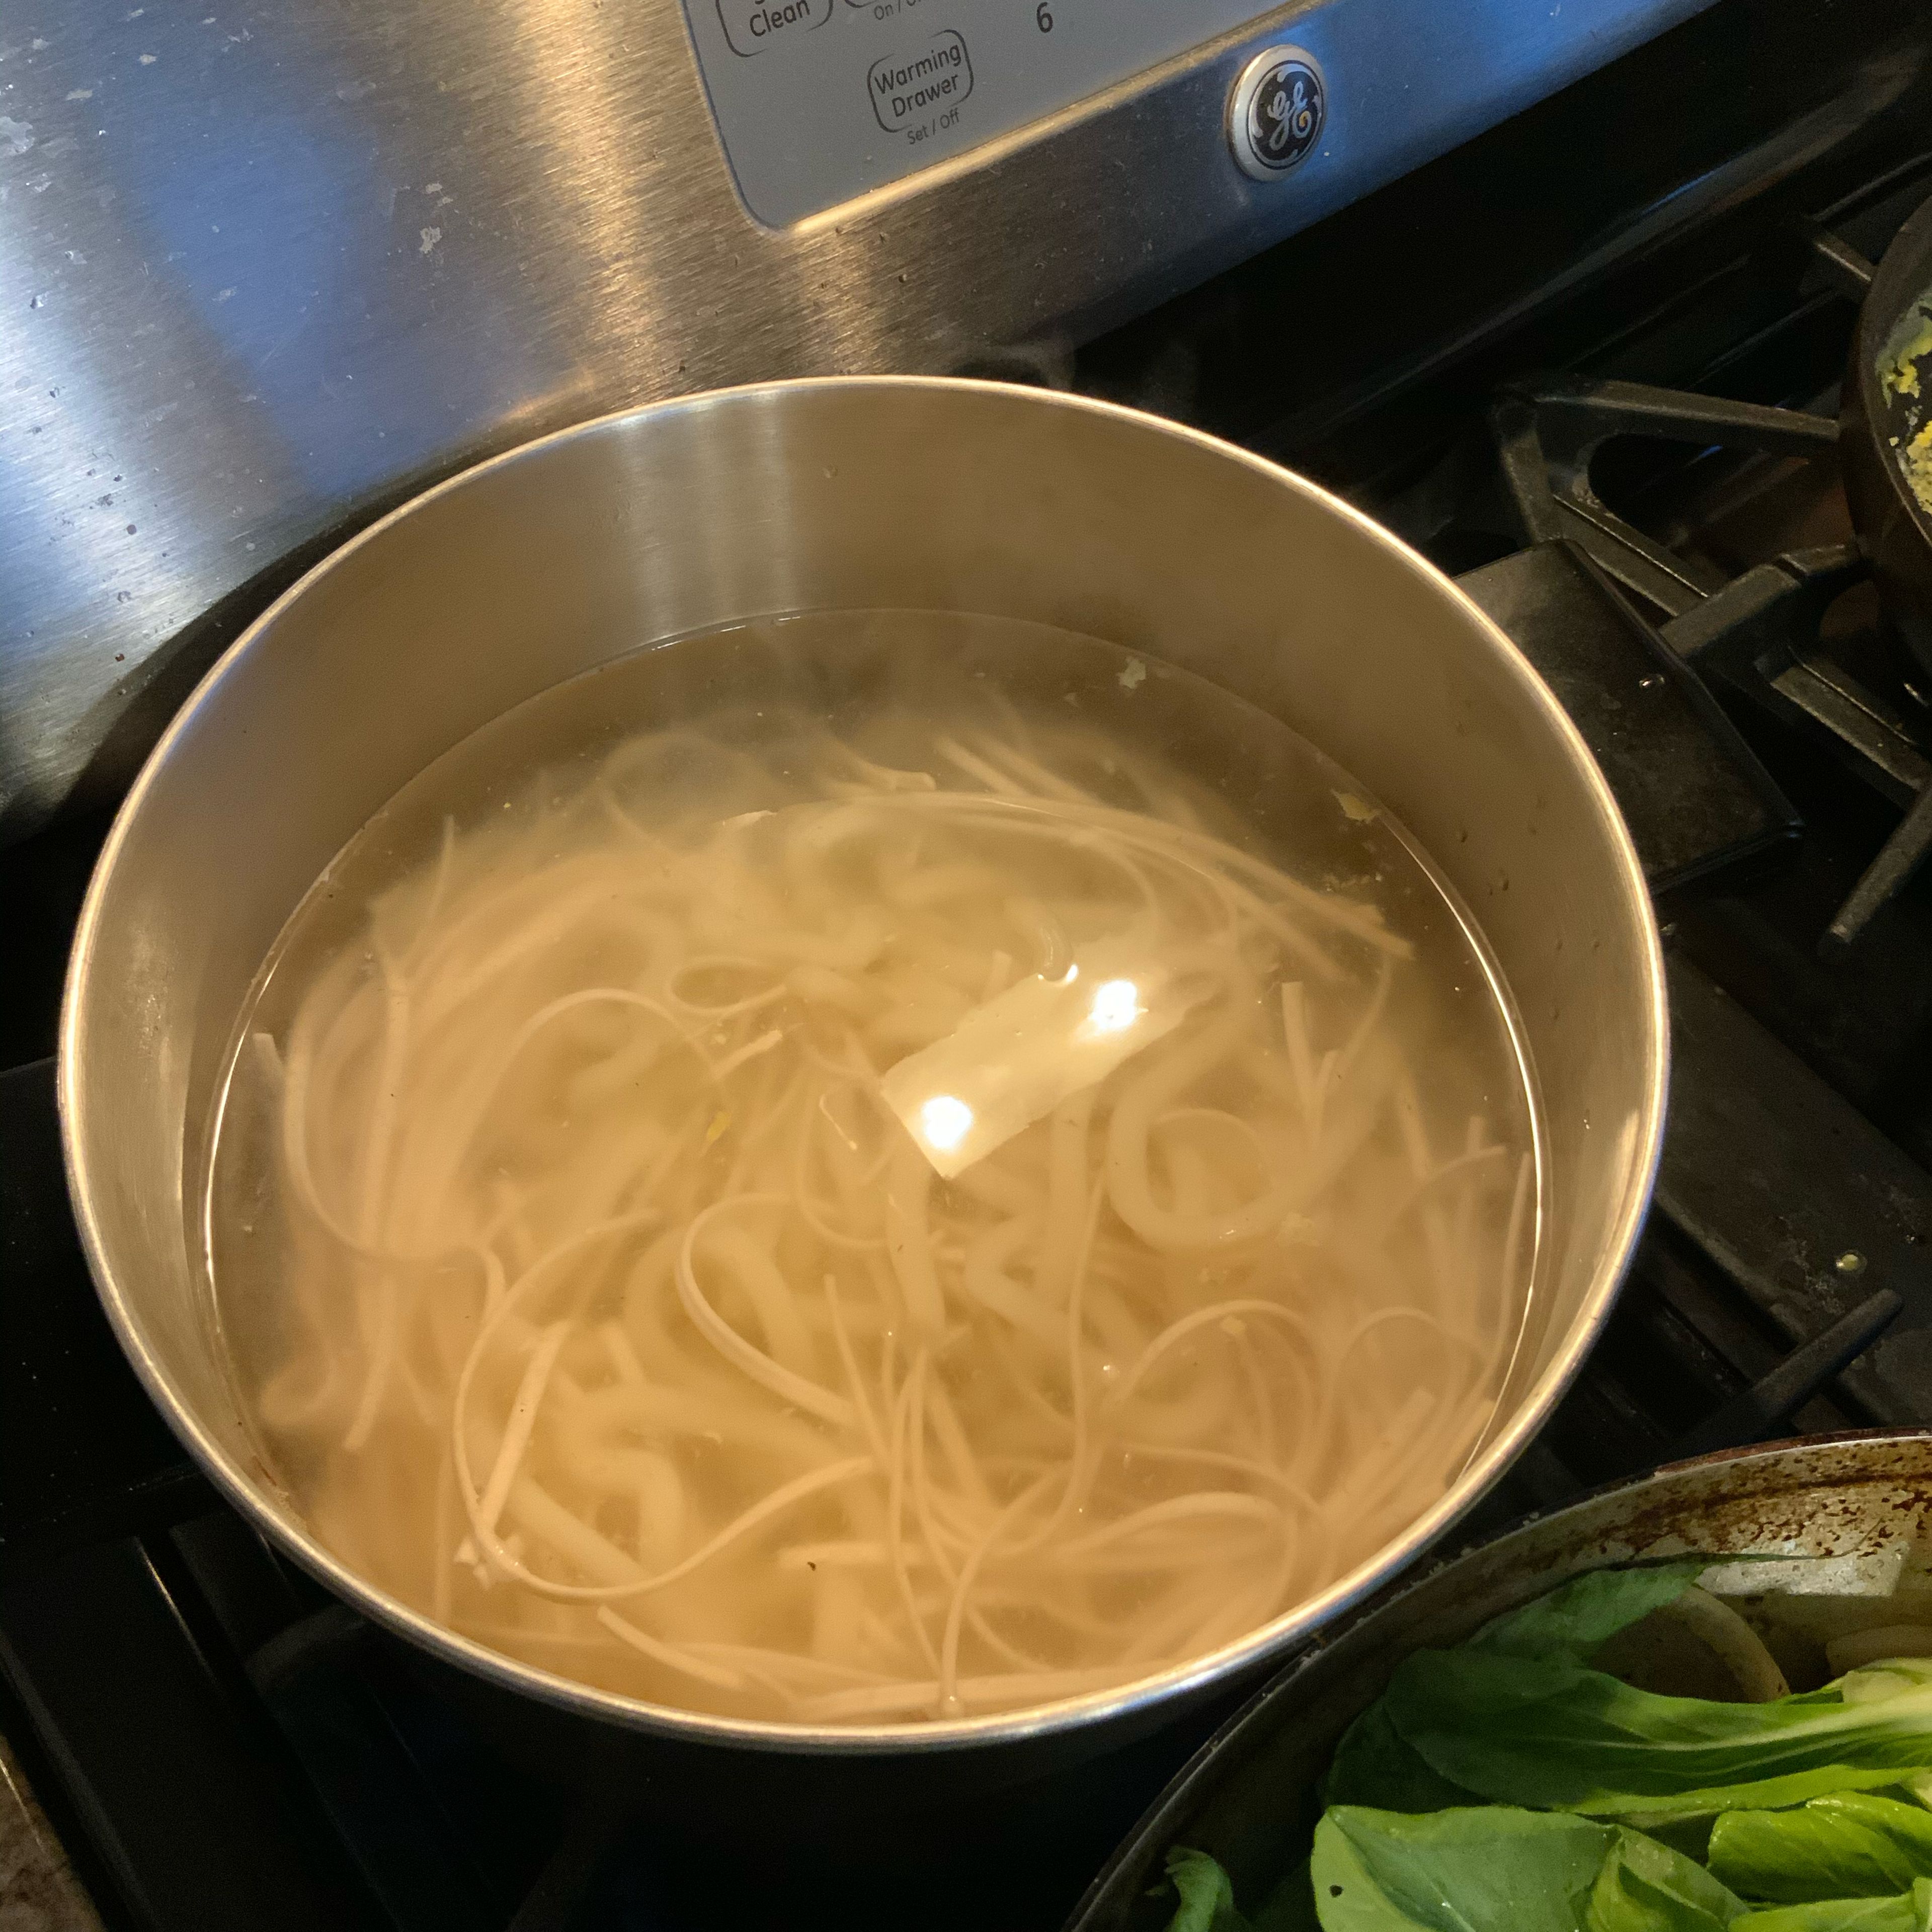 Cook noodles in a boiled water